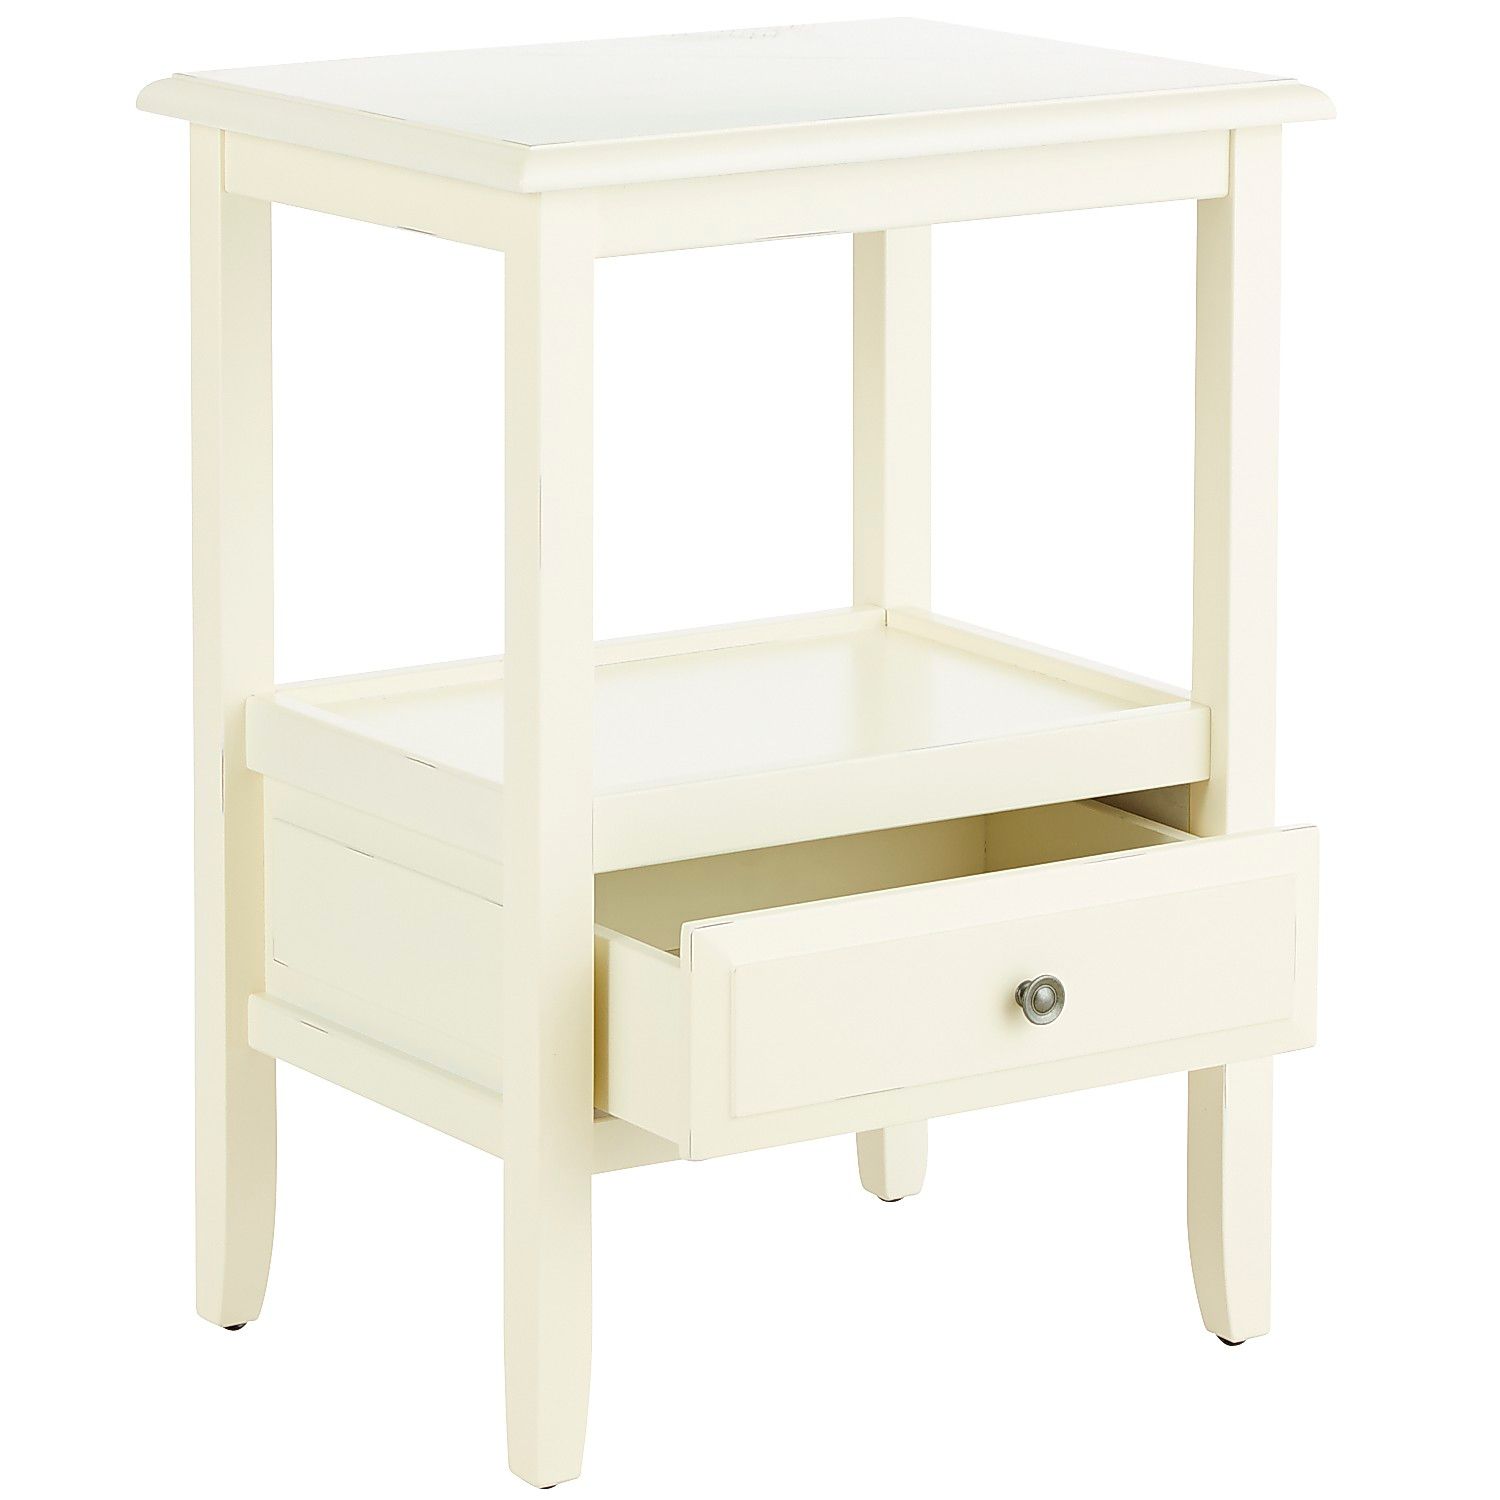 anywhere antique white end table with knobs pier imports one accent inch round bar storage cabinet wrought iron patio dining currey and company lighting target circular solid wood